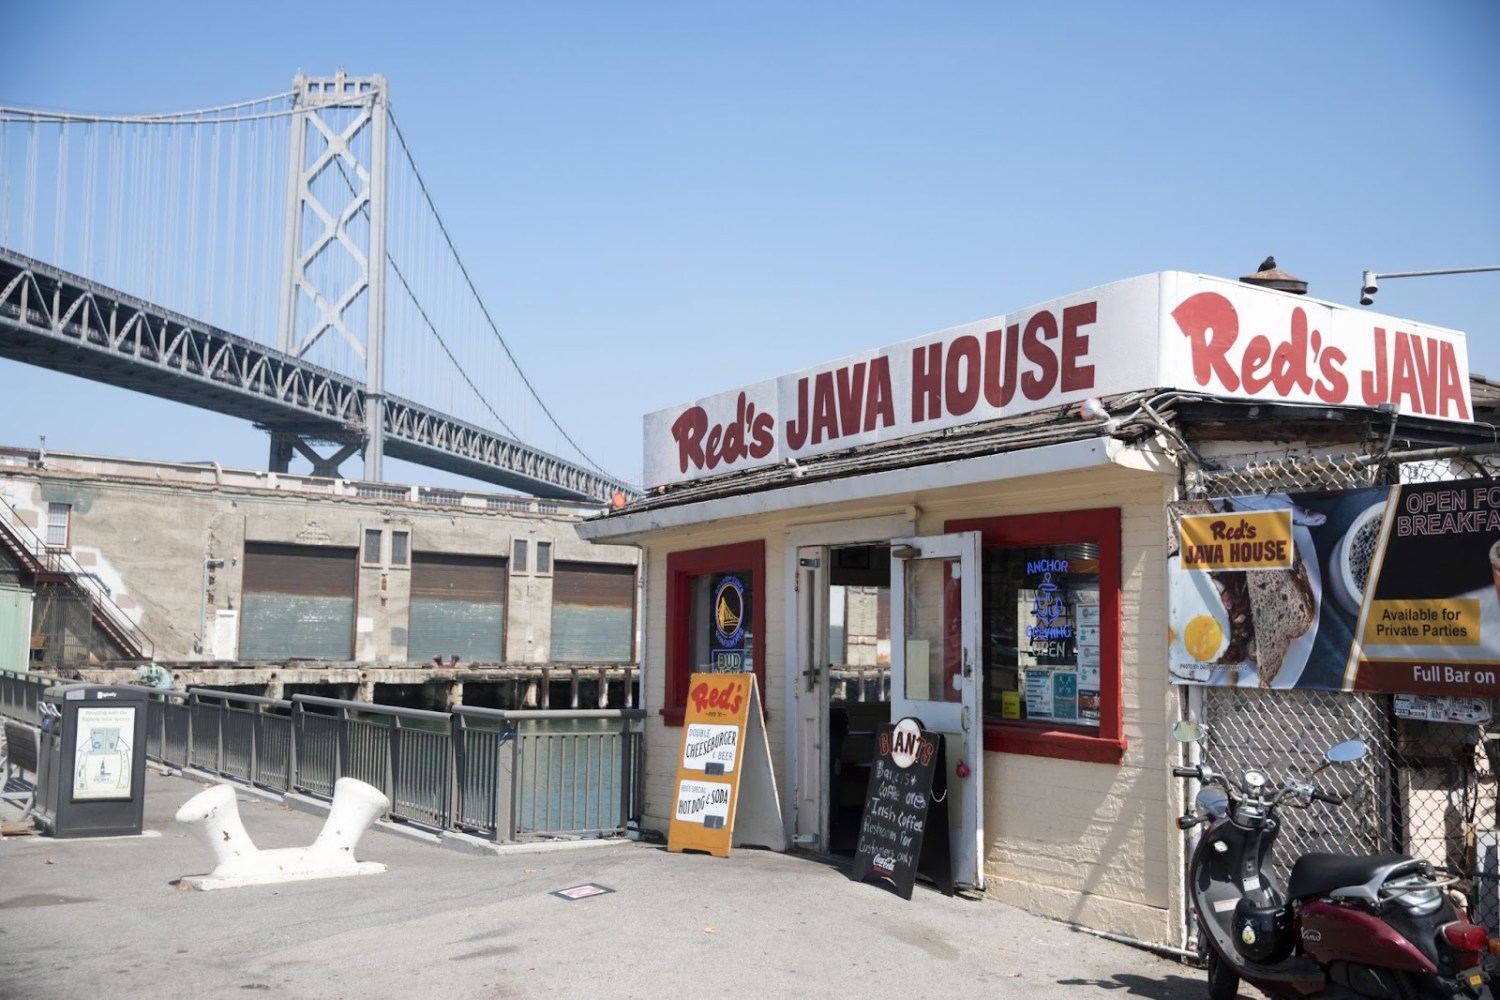 Red's Java House - A Giant Classic 